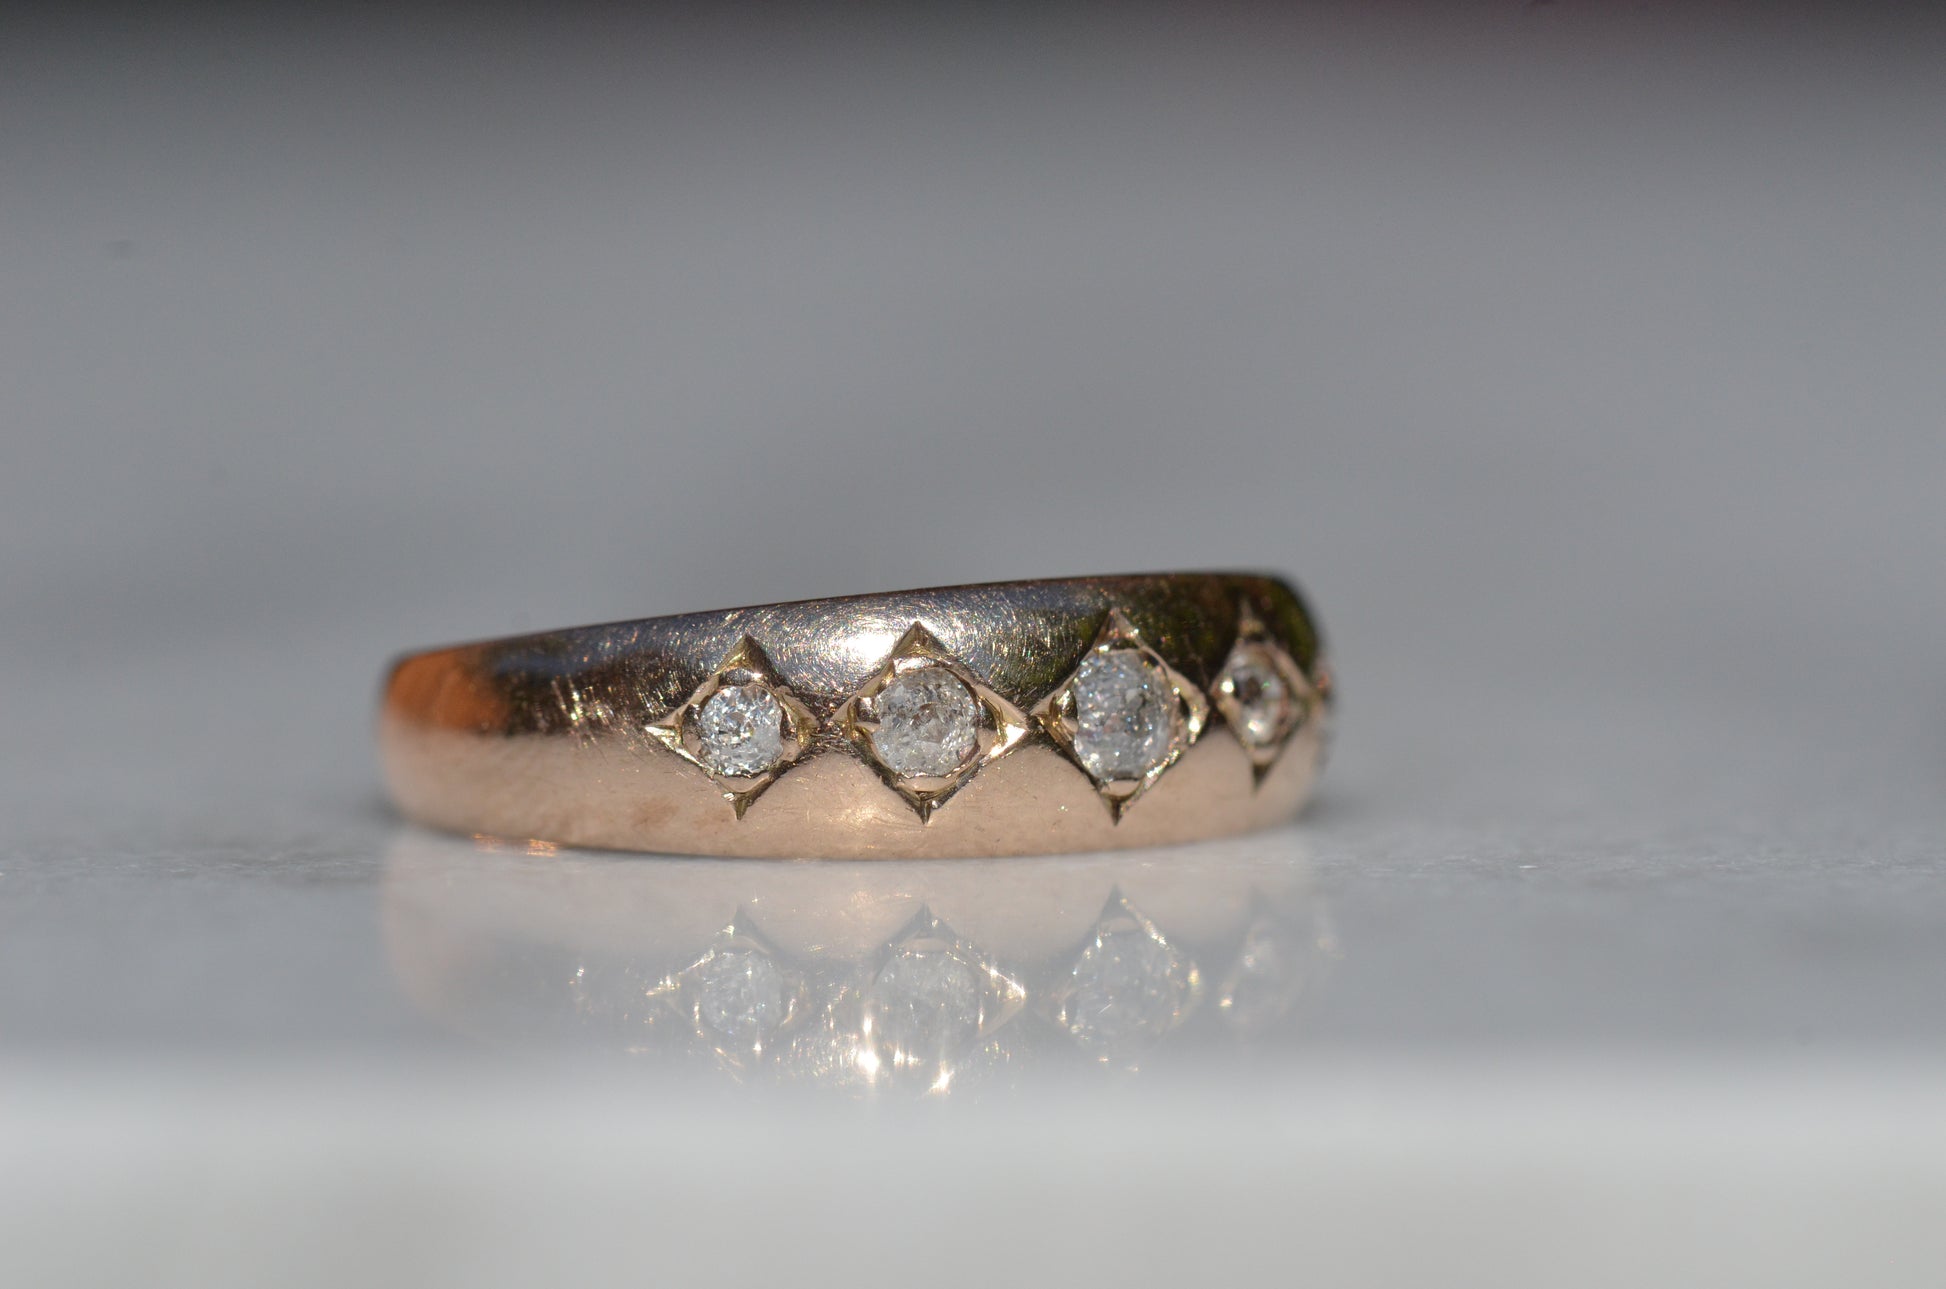 A tightly-cropped macro shot of the Victorian ring, showing the hand-cut diamond-shaped frames that hold each cushion-shaped stone. The old mine cut diamonds have internal fractures and inclusions but still sparkle in the direct sun, and the gold is weathered from a century of wear. The ring is facing slightly to the right, to better see the detail of the tapering side stones.